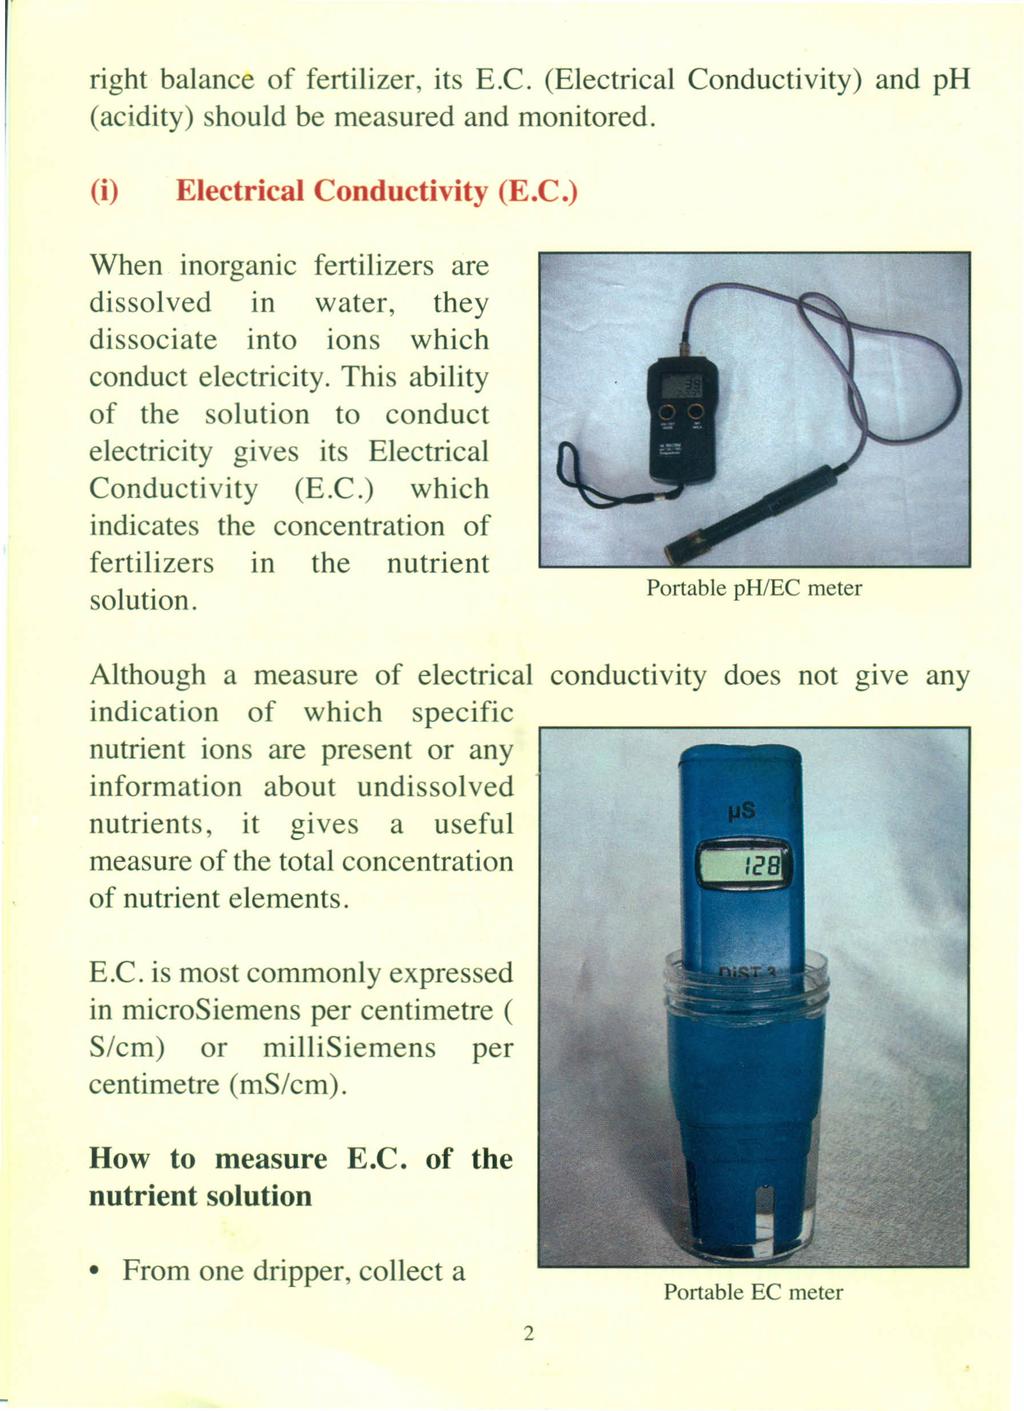 right balance of fertilizer, its E.C. (Electrical Conductivity) and ph (acidity) should be measured and monitored. (i) Electrical Conductivity (E.C.) When inorganic fertilizers are dissolved in water, they dissociate into ions which conduct electricity.